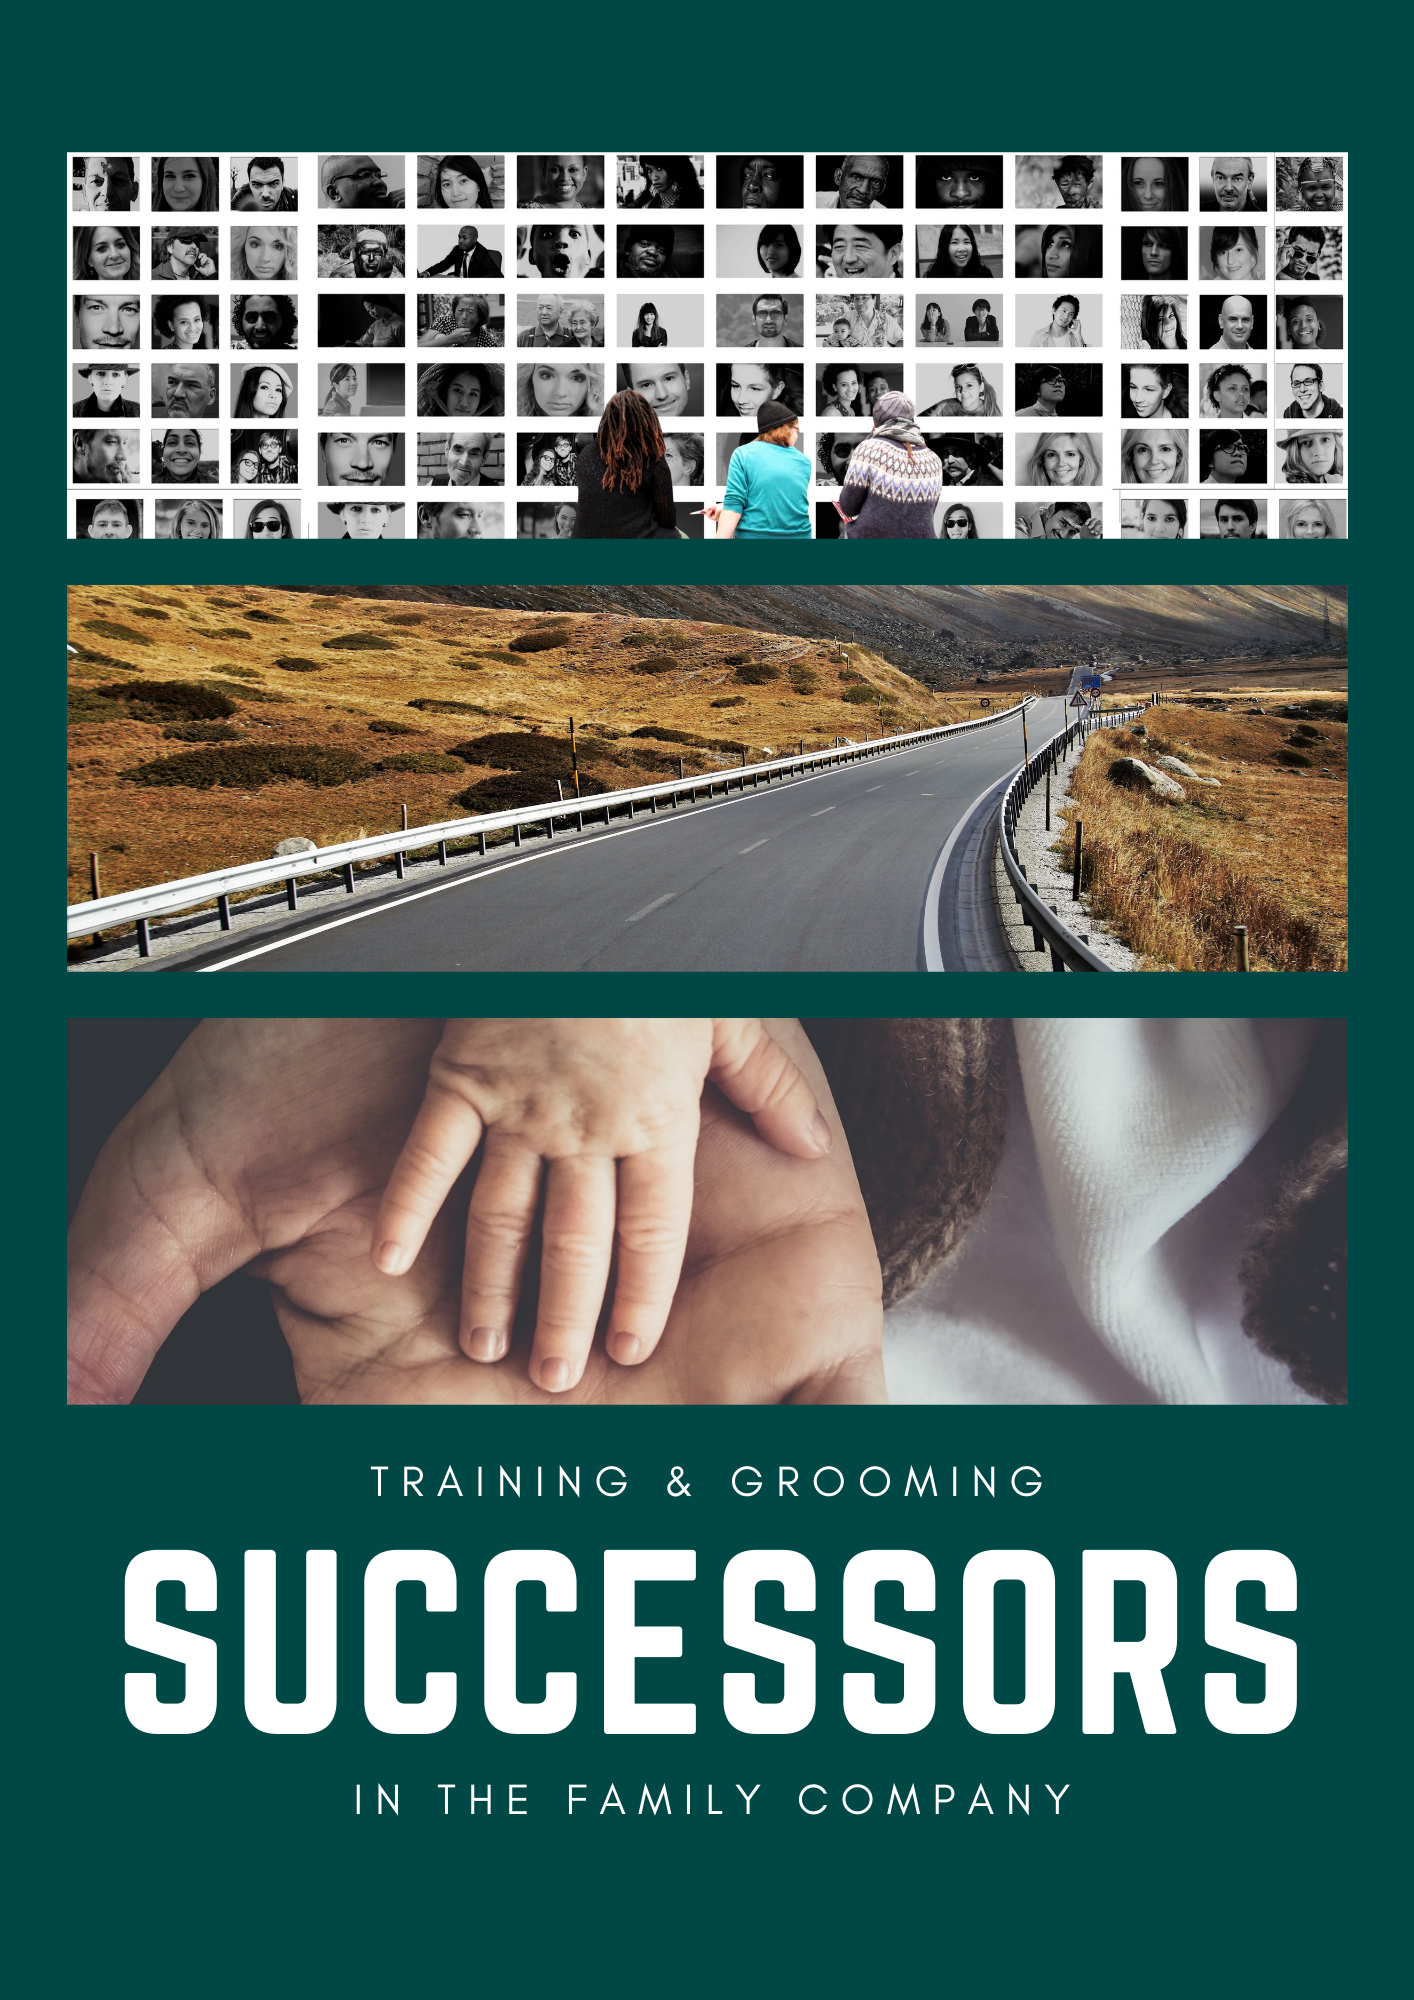 Training & Grooming Successors in Family Company